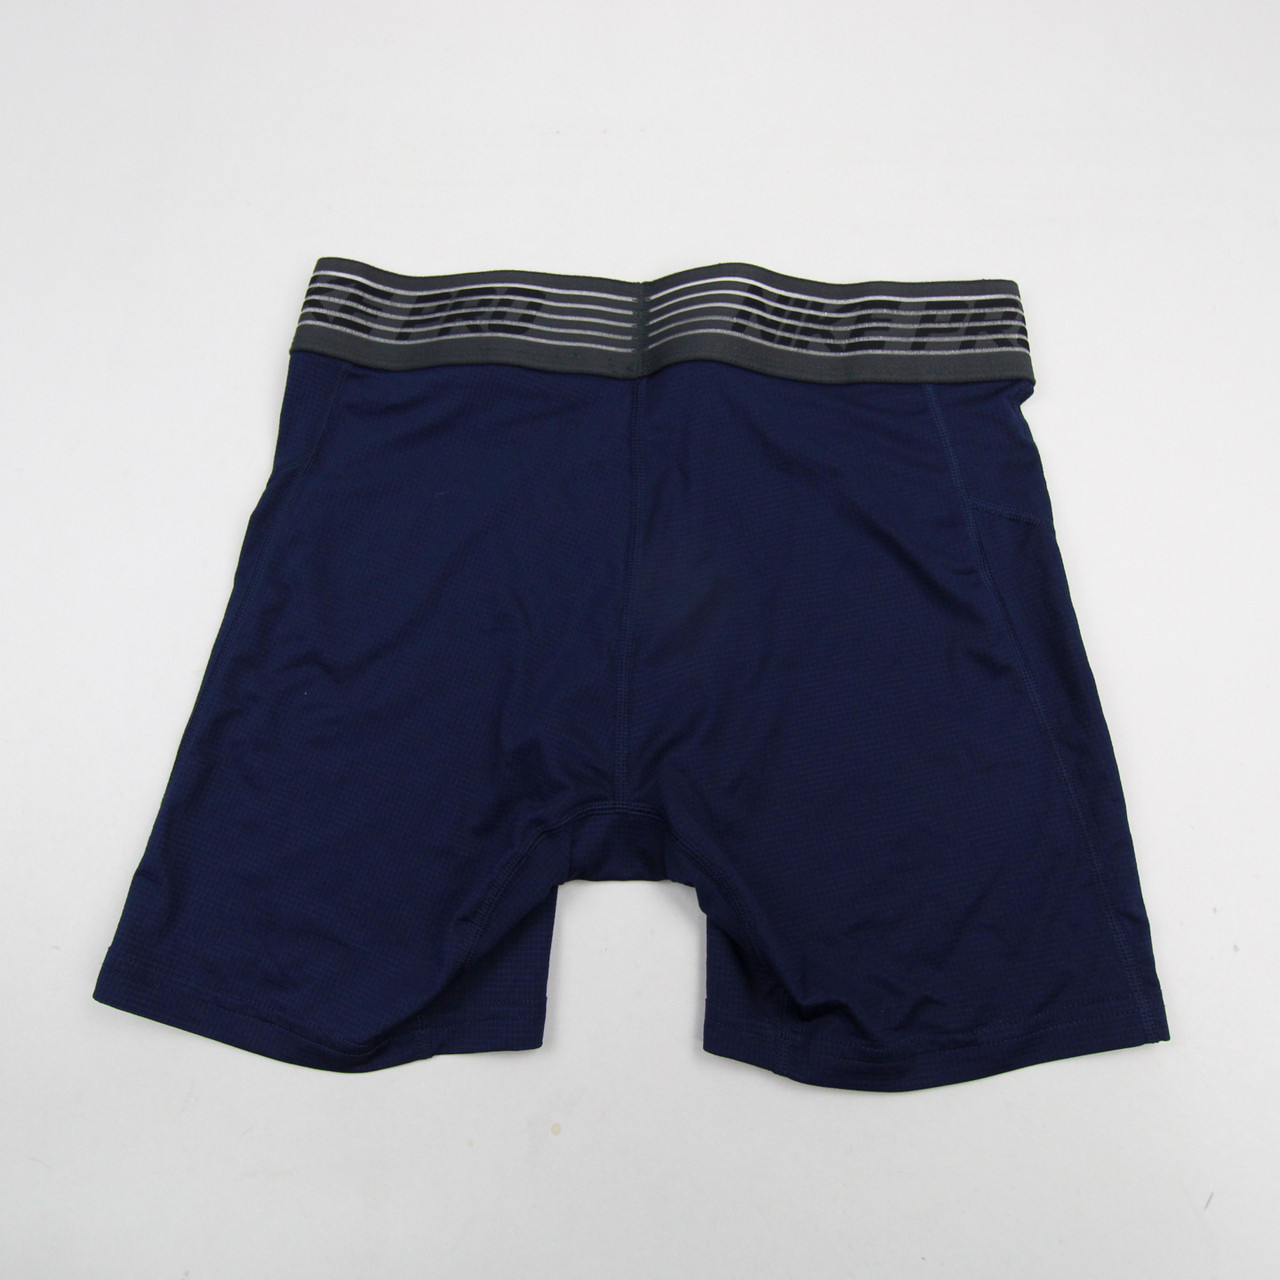 Nike Pro Compression Shorts Men's Navy Used M 39